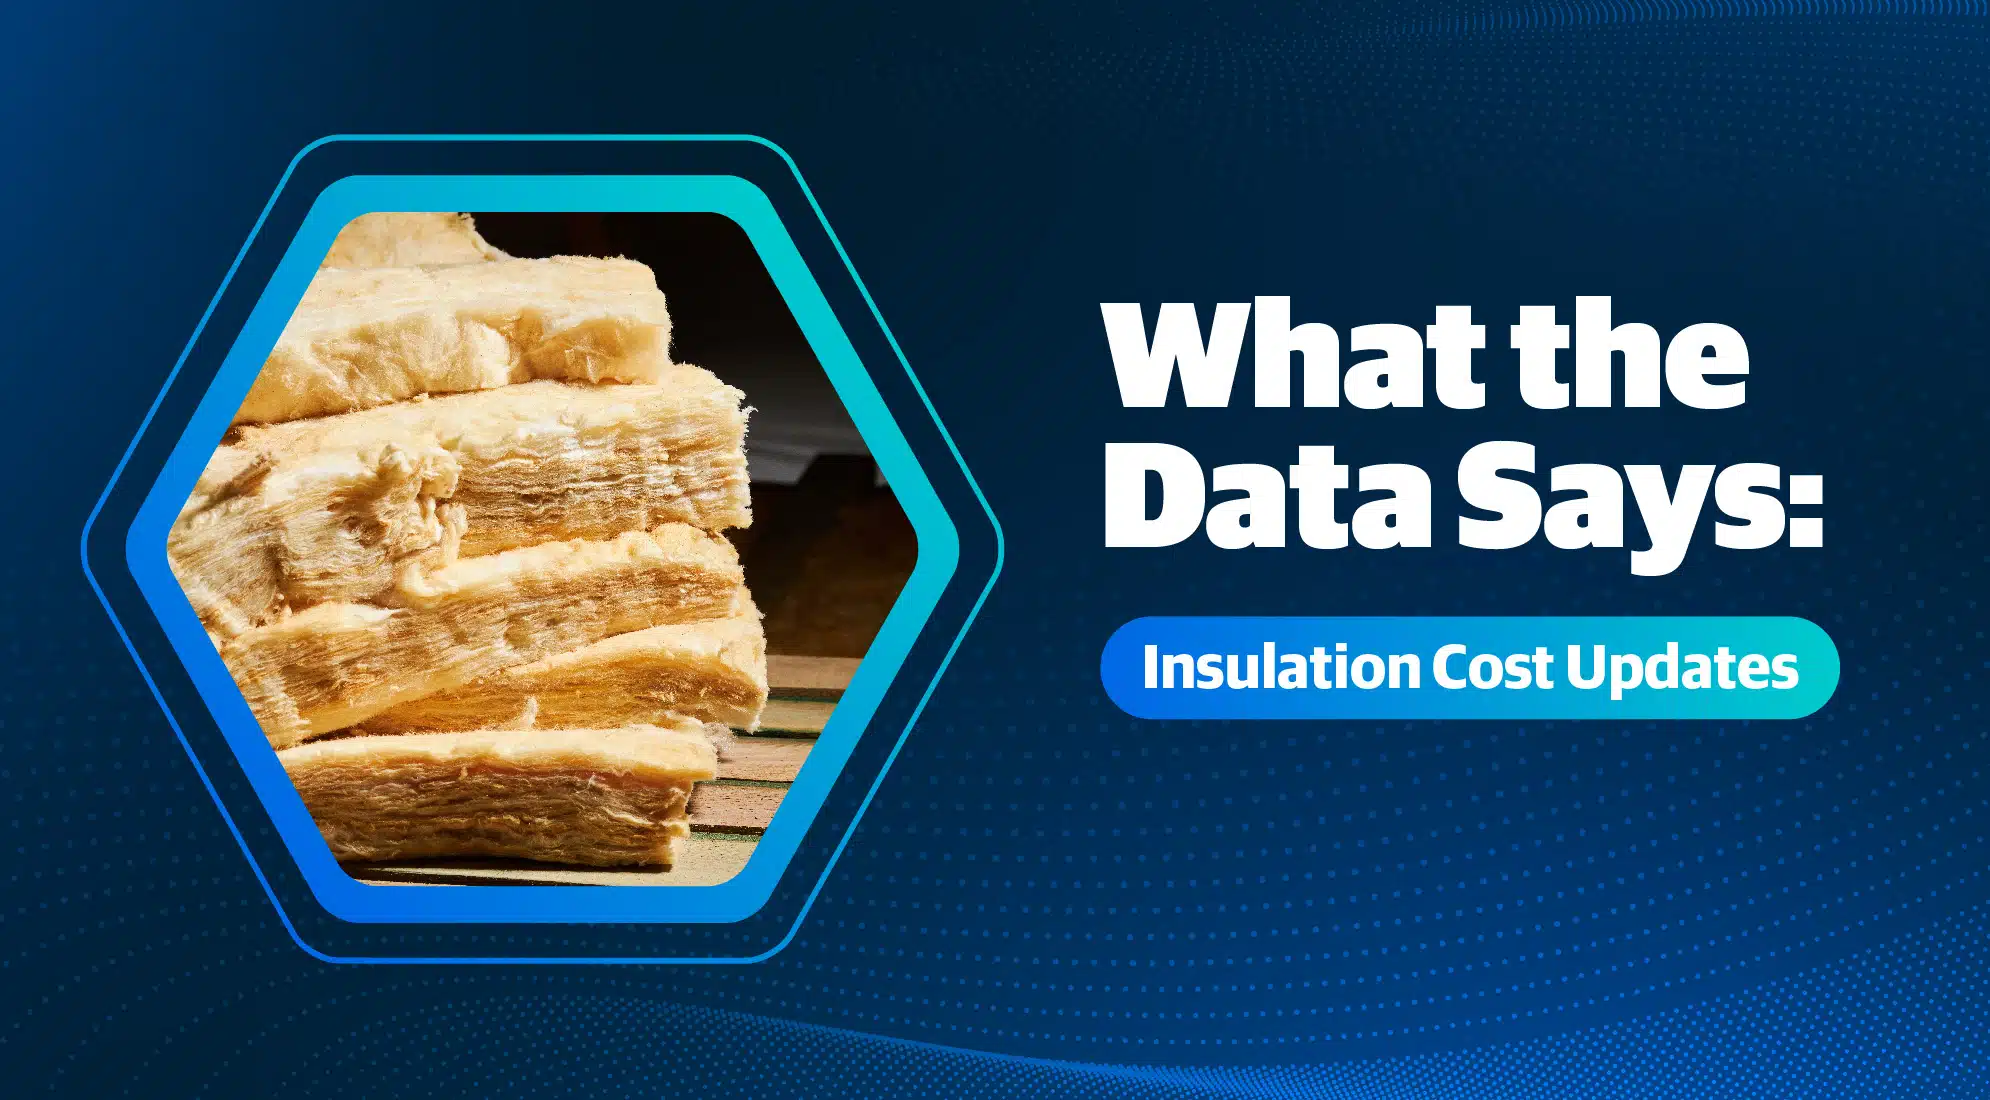 What the Data Says: Insulation Cost Updates